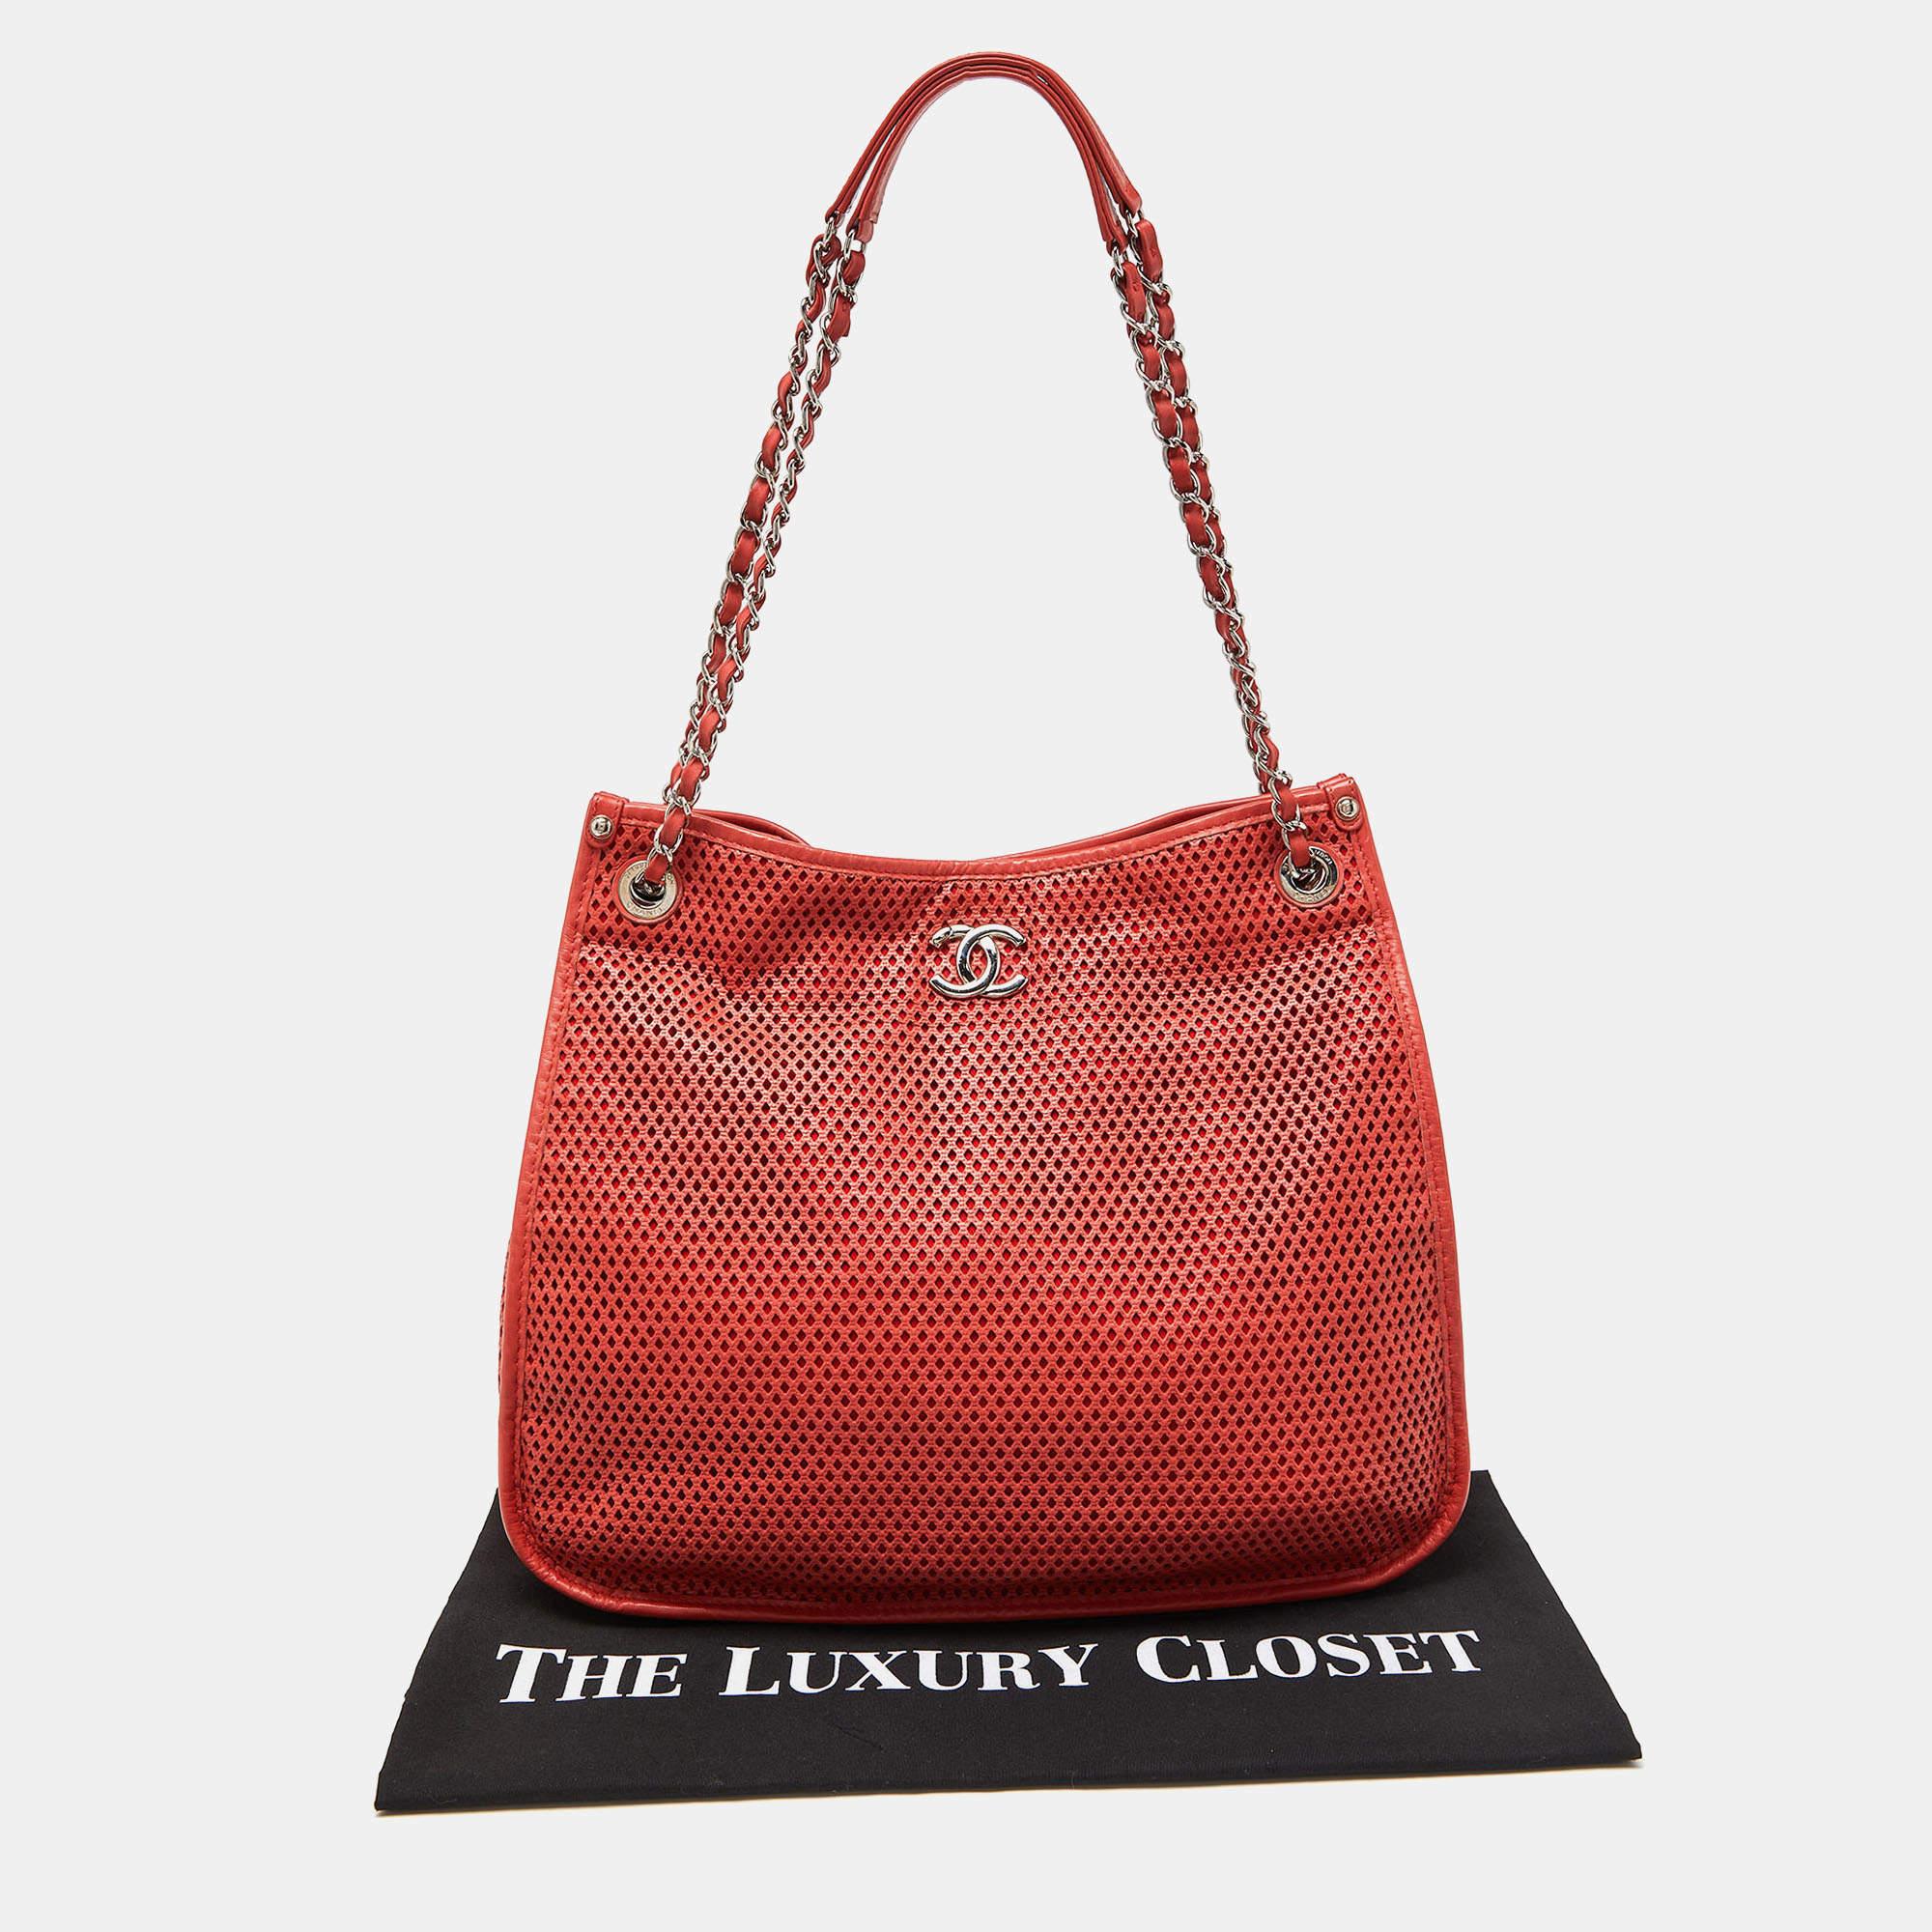 Chanel Red Perforated Leather Up in the Air Shoulder Bag 6